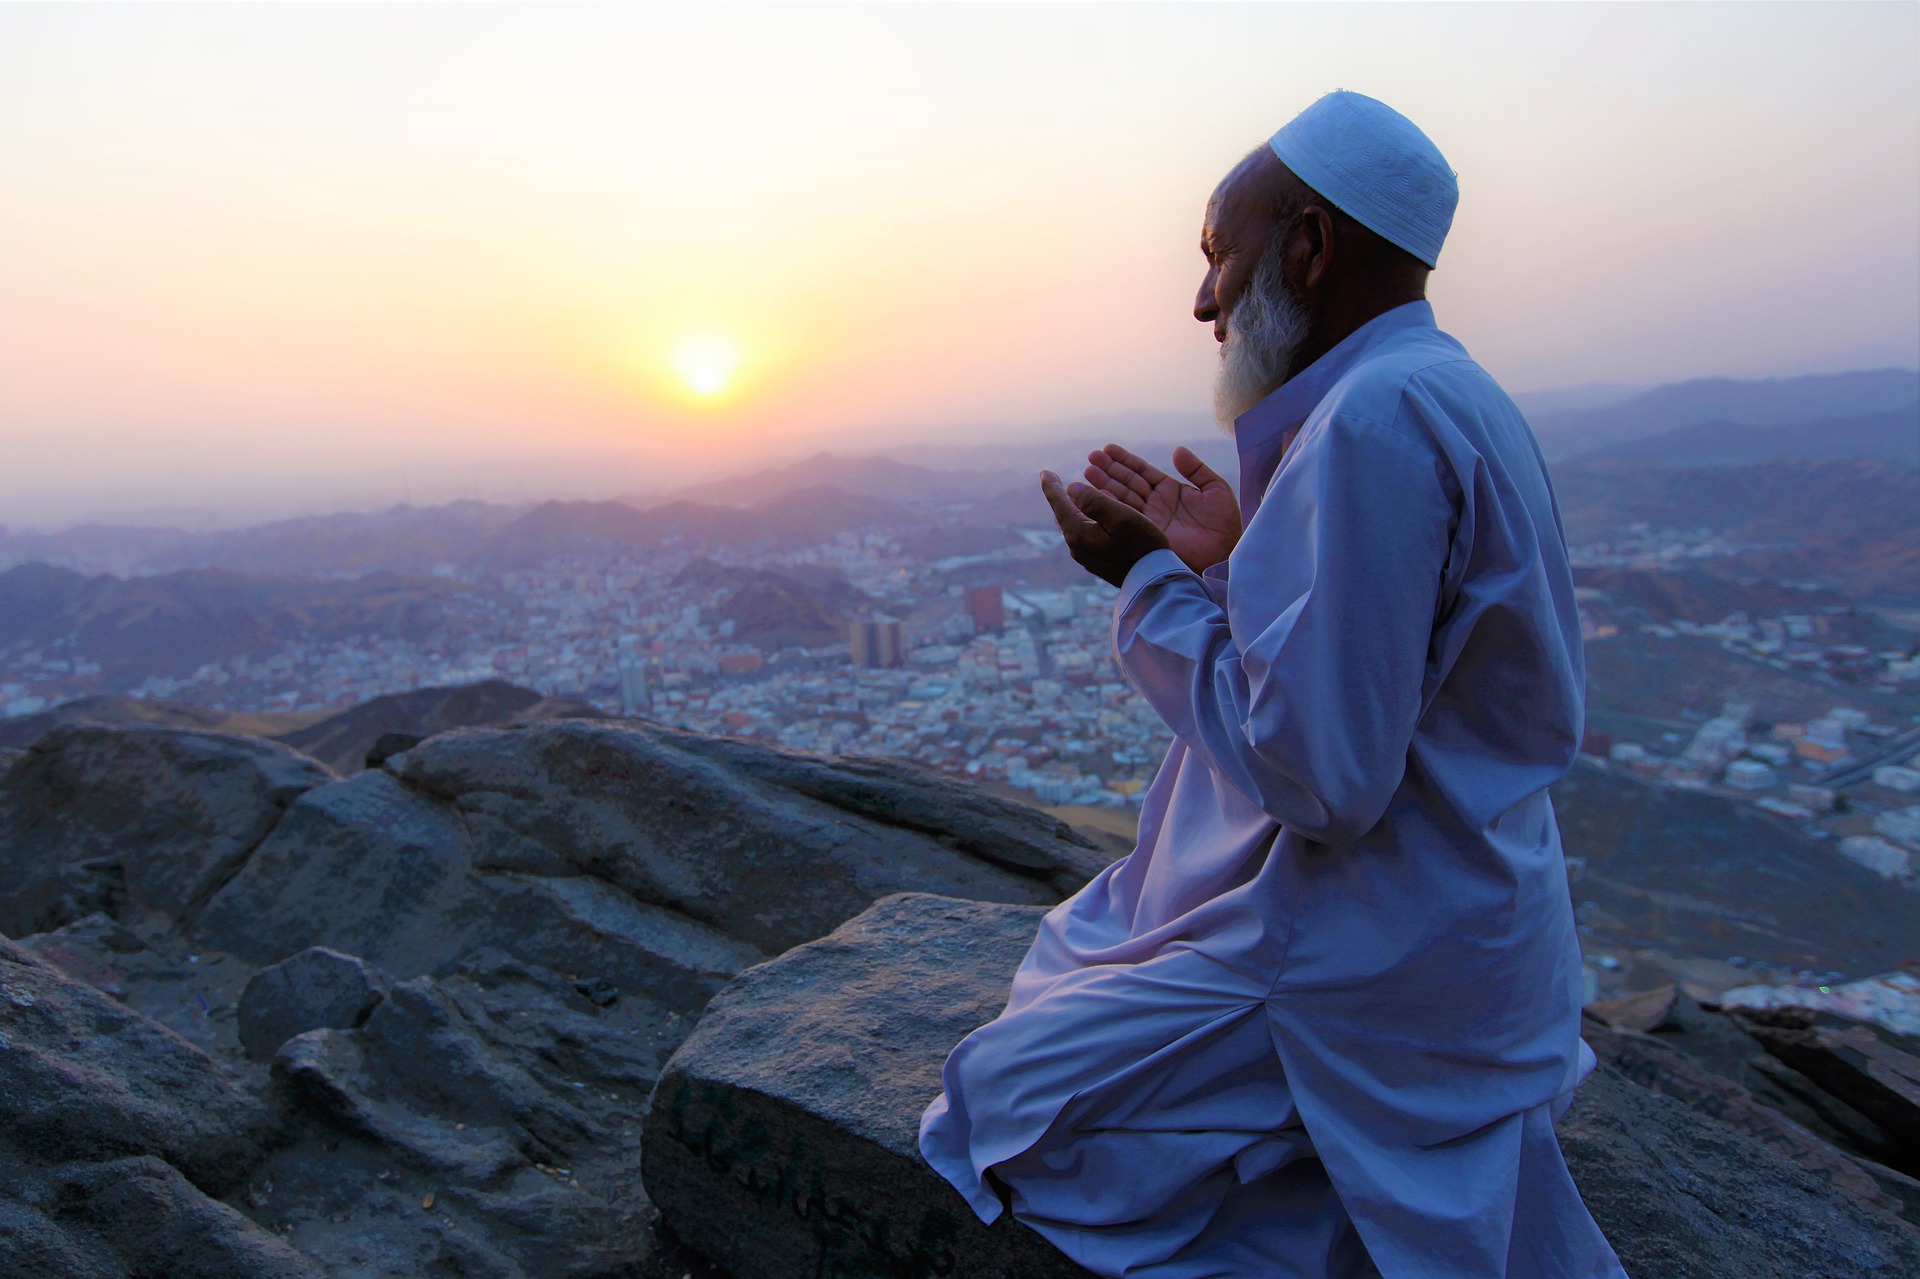 The Murshid at prayer early in the morning